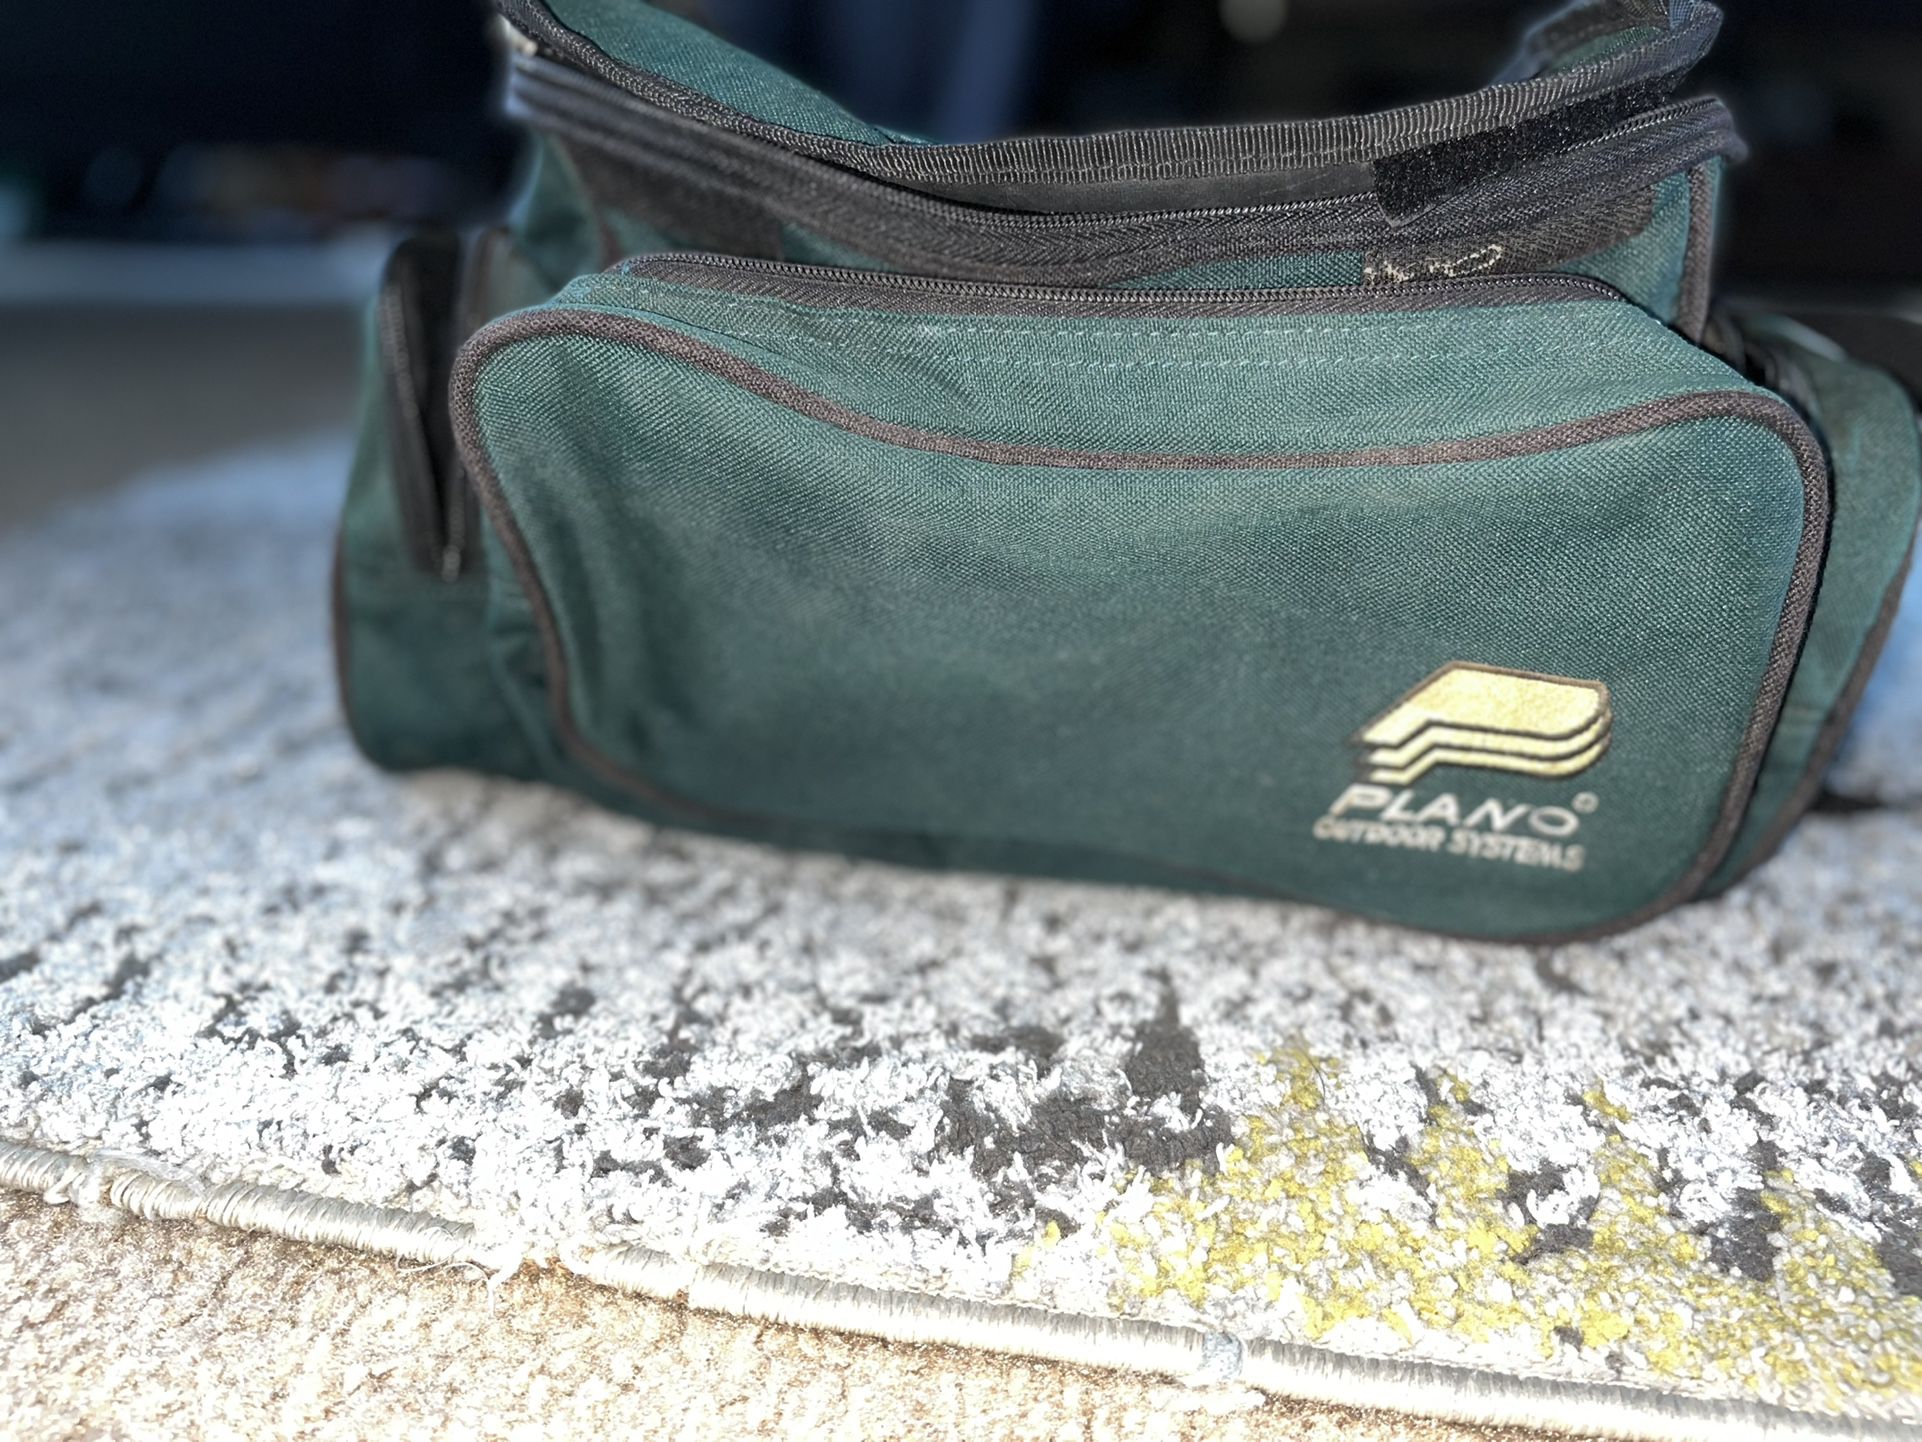 Plano Tackle Bag for Sale in Hayward, CA - OfferUp